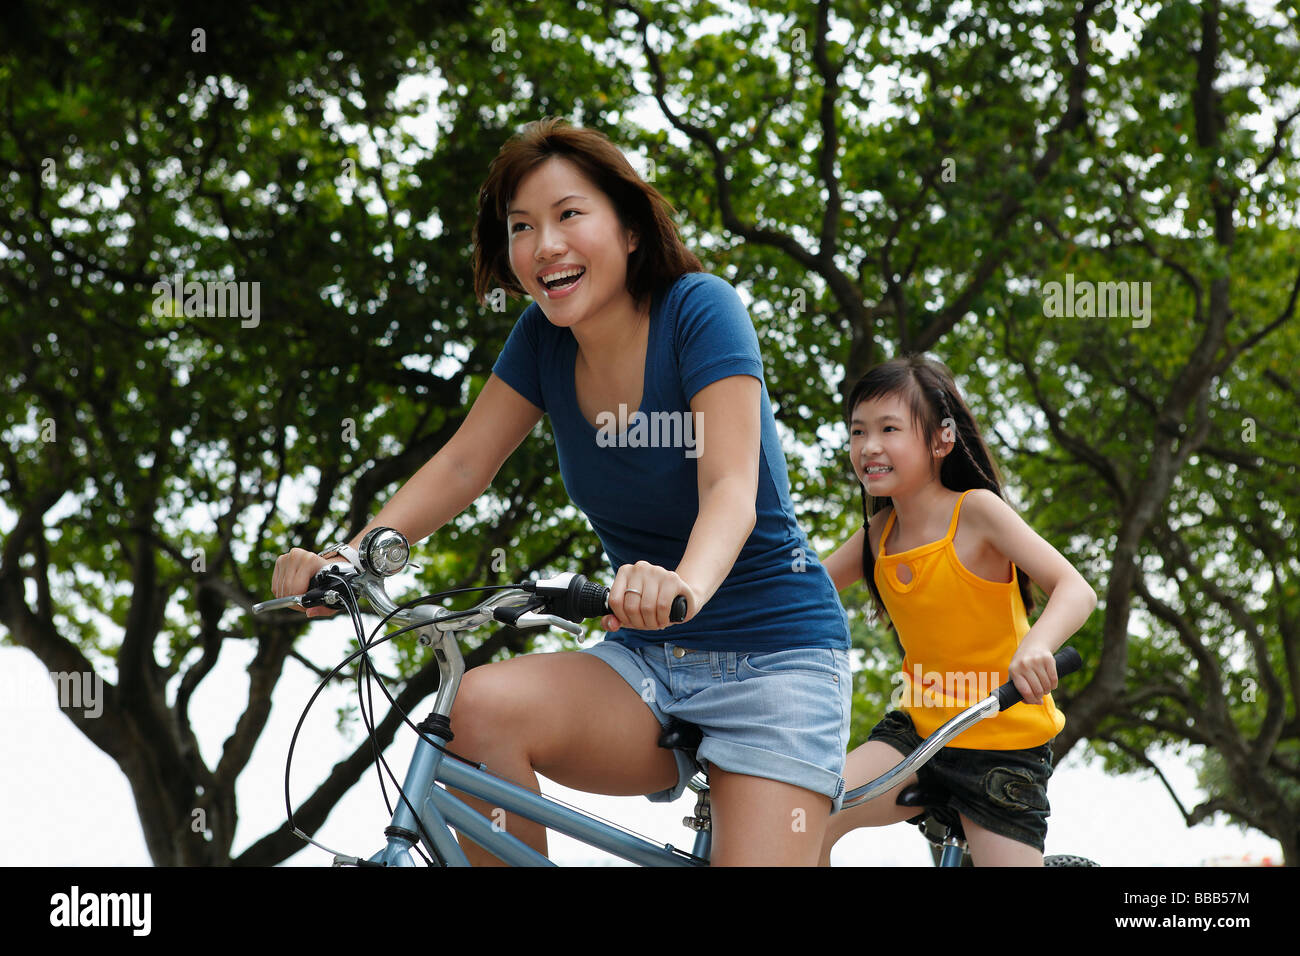 woman and young girl riding tandem bike Stock Photo